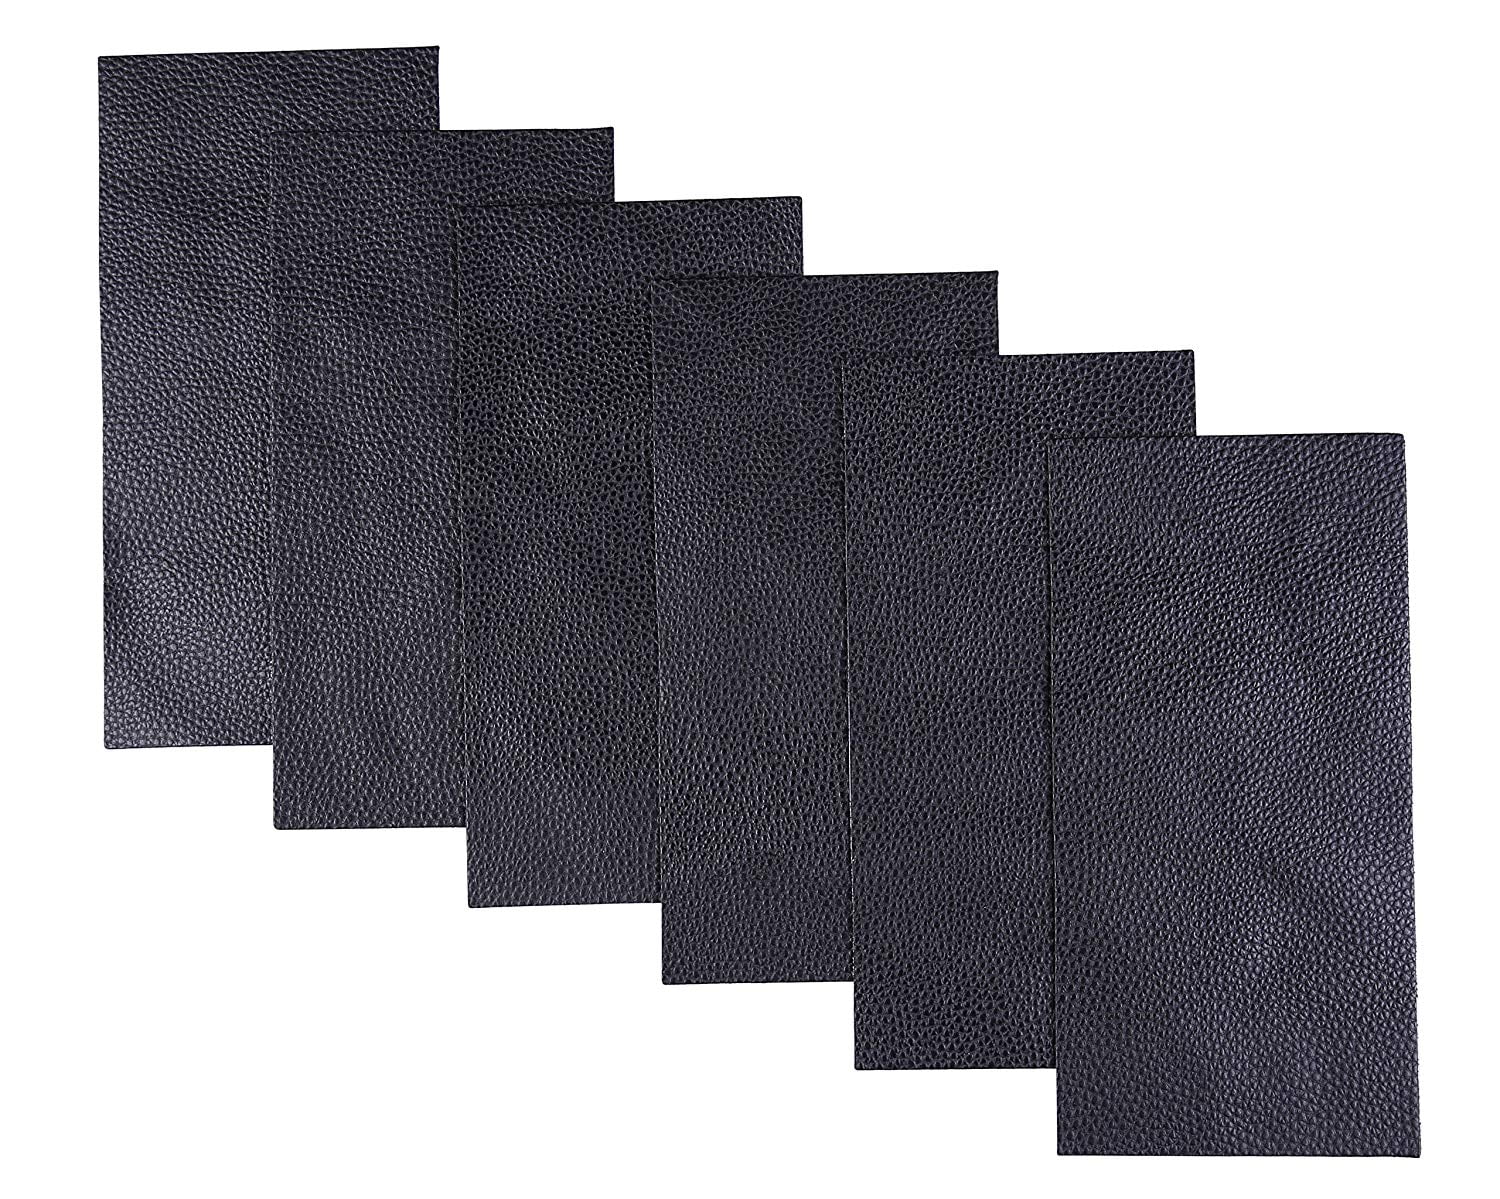 6 Pcs Leather Repair Patch Pleather, How To Repair Artificial Leather Sofa